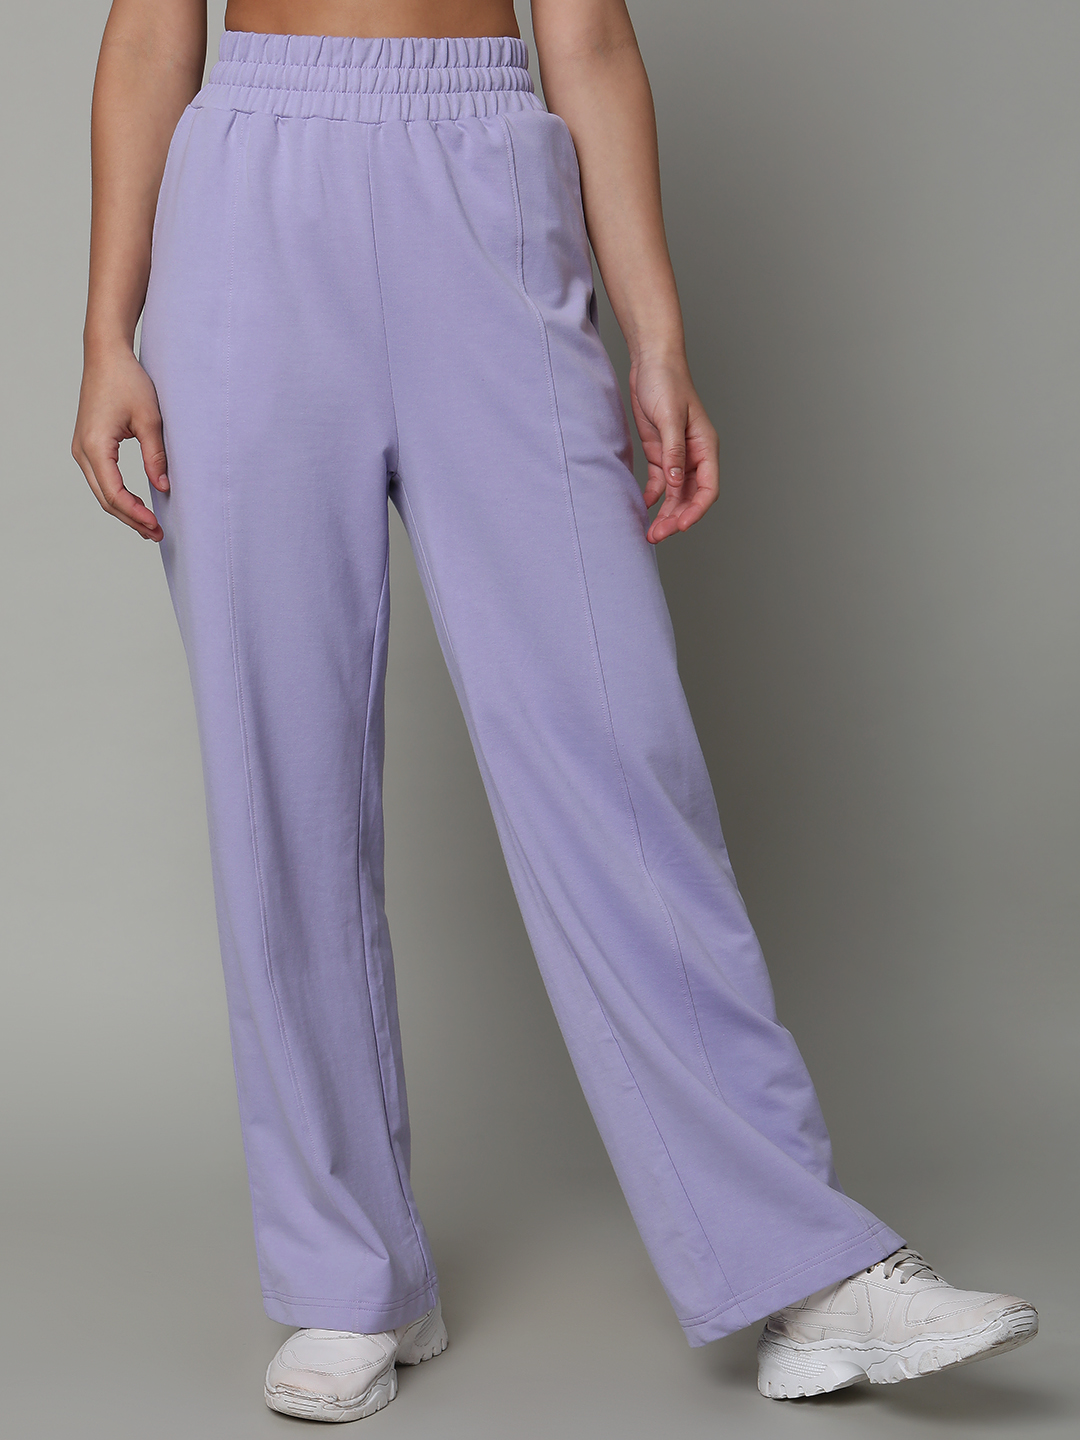 Terry All Weather Lilac Tracks For Women